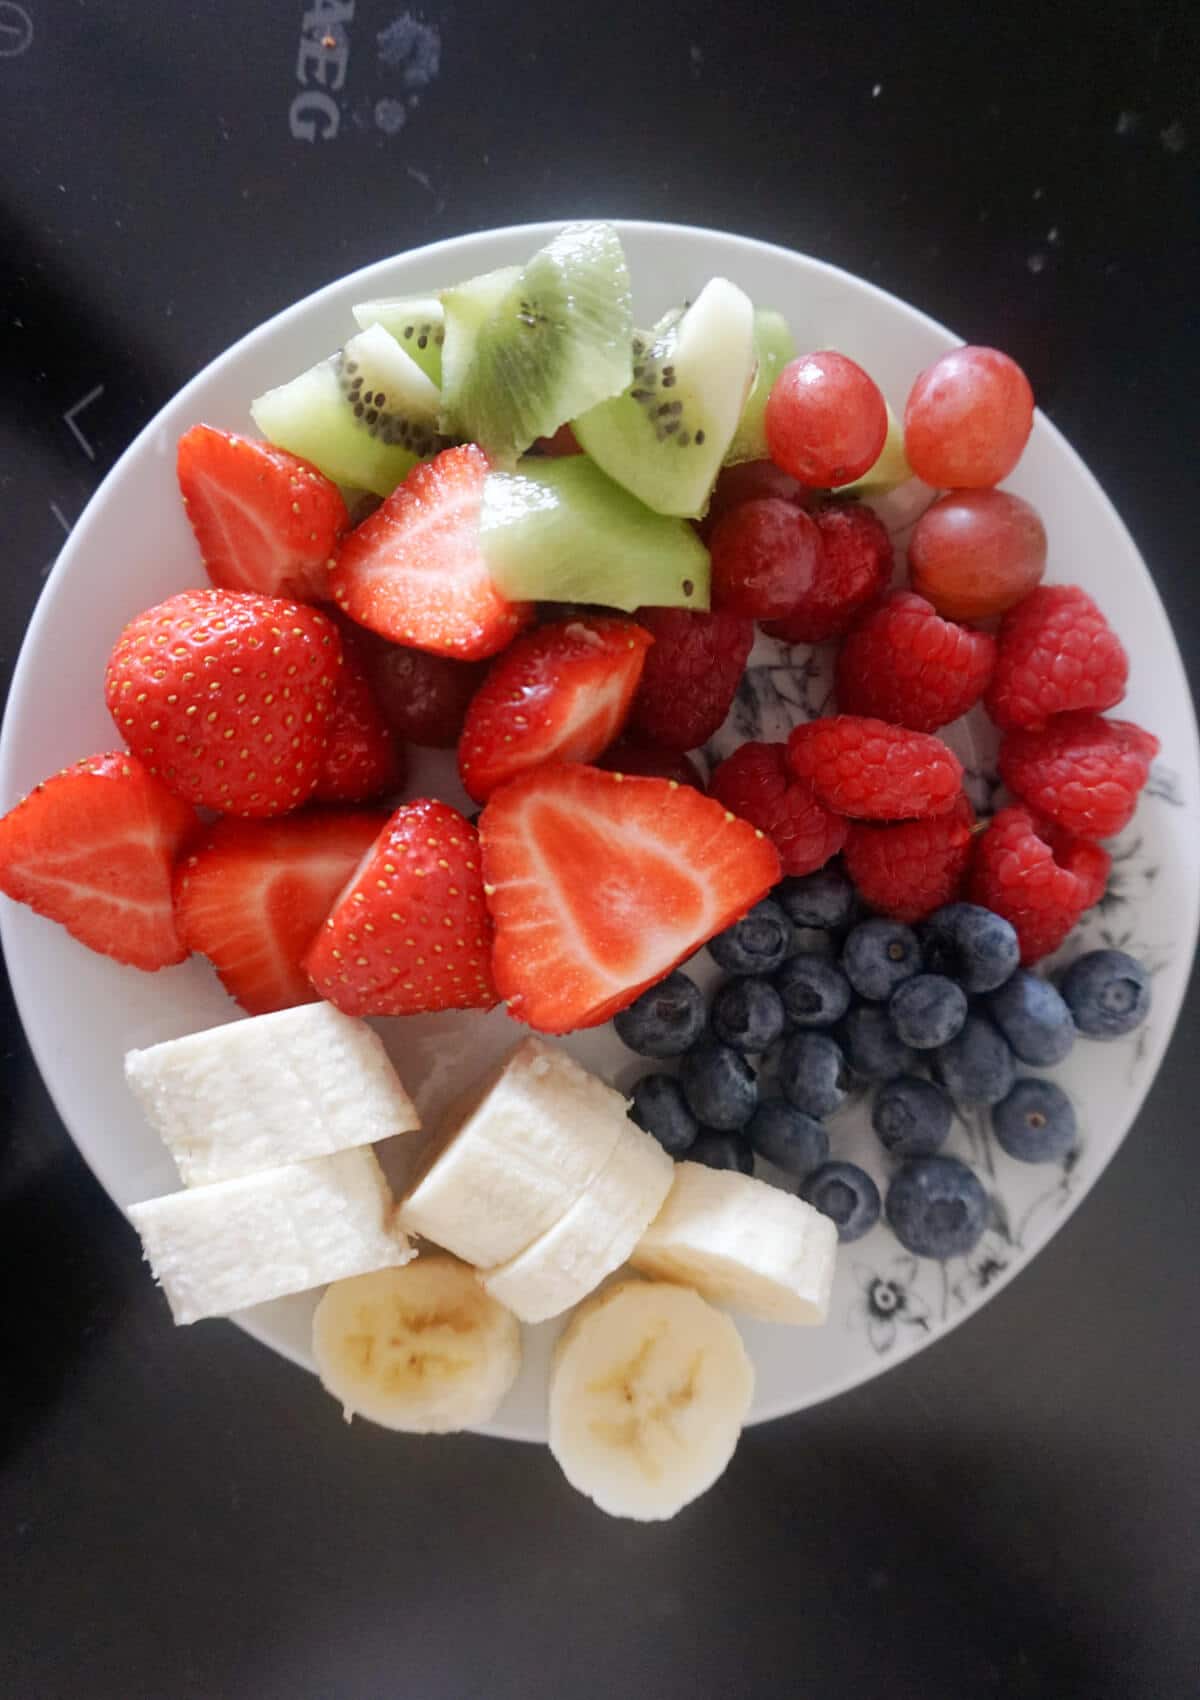 Overhead shot of a plate with chunks of fresh berries, bananas and kiwis.